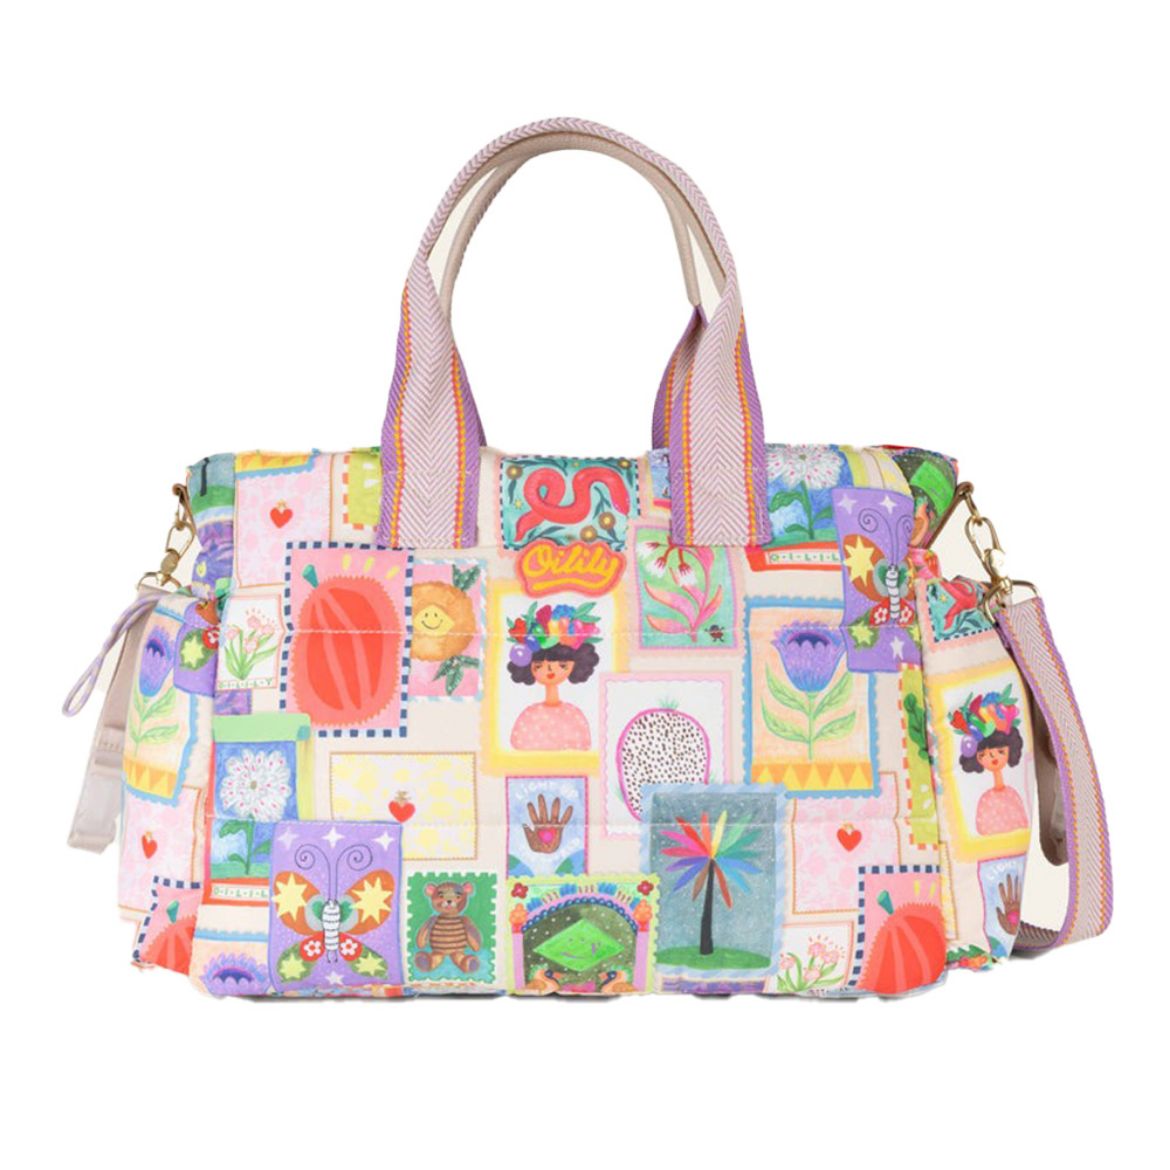 Picture of Oilily Bobo Baby Bag